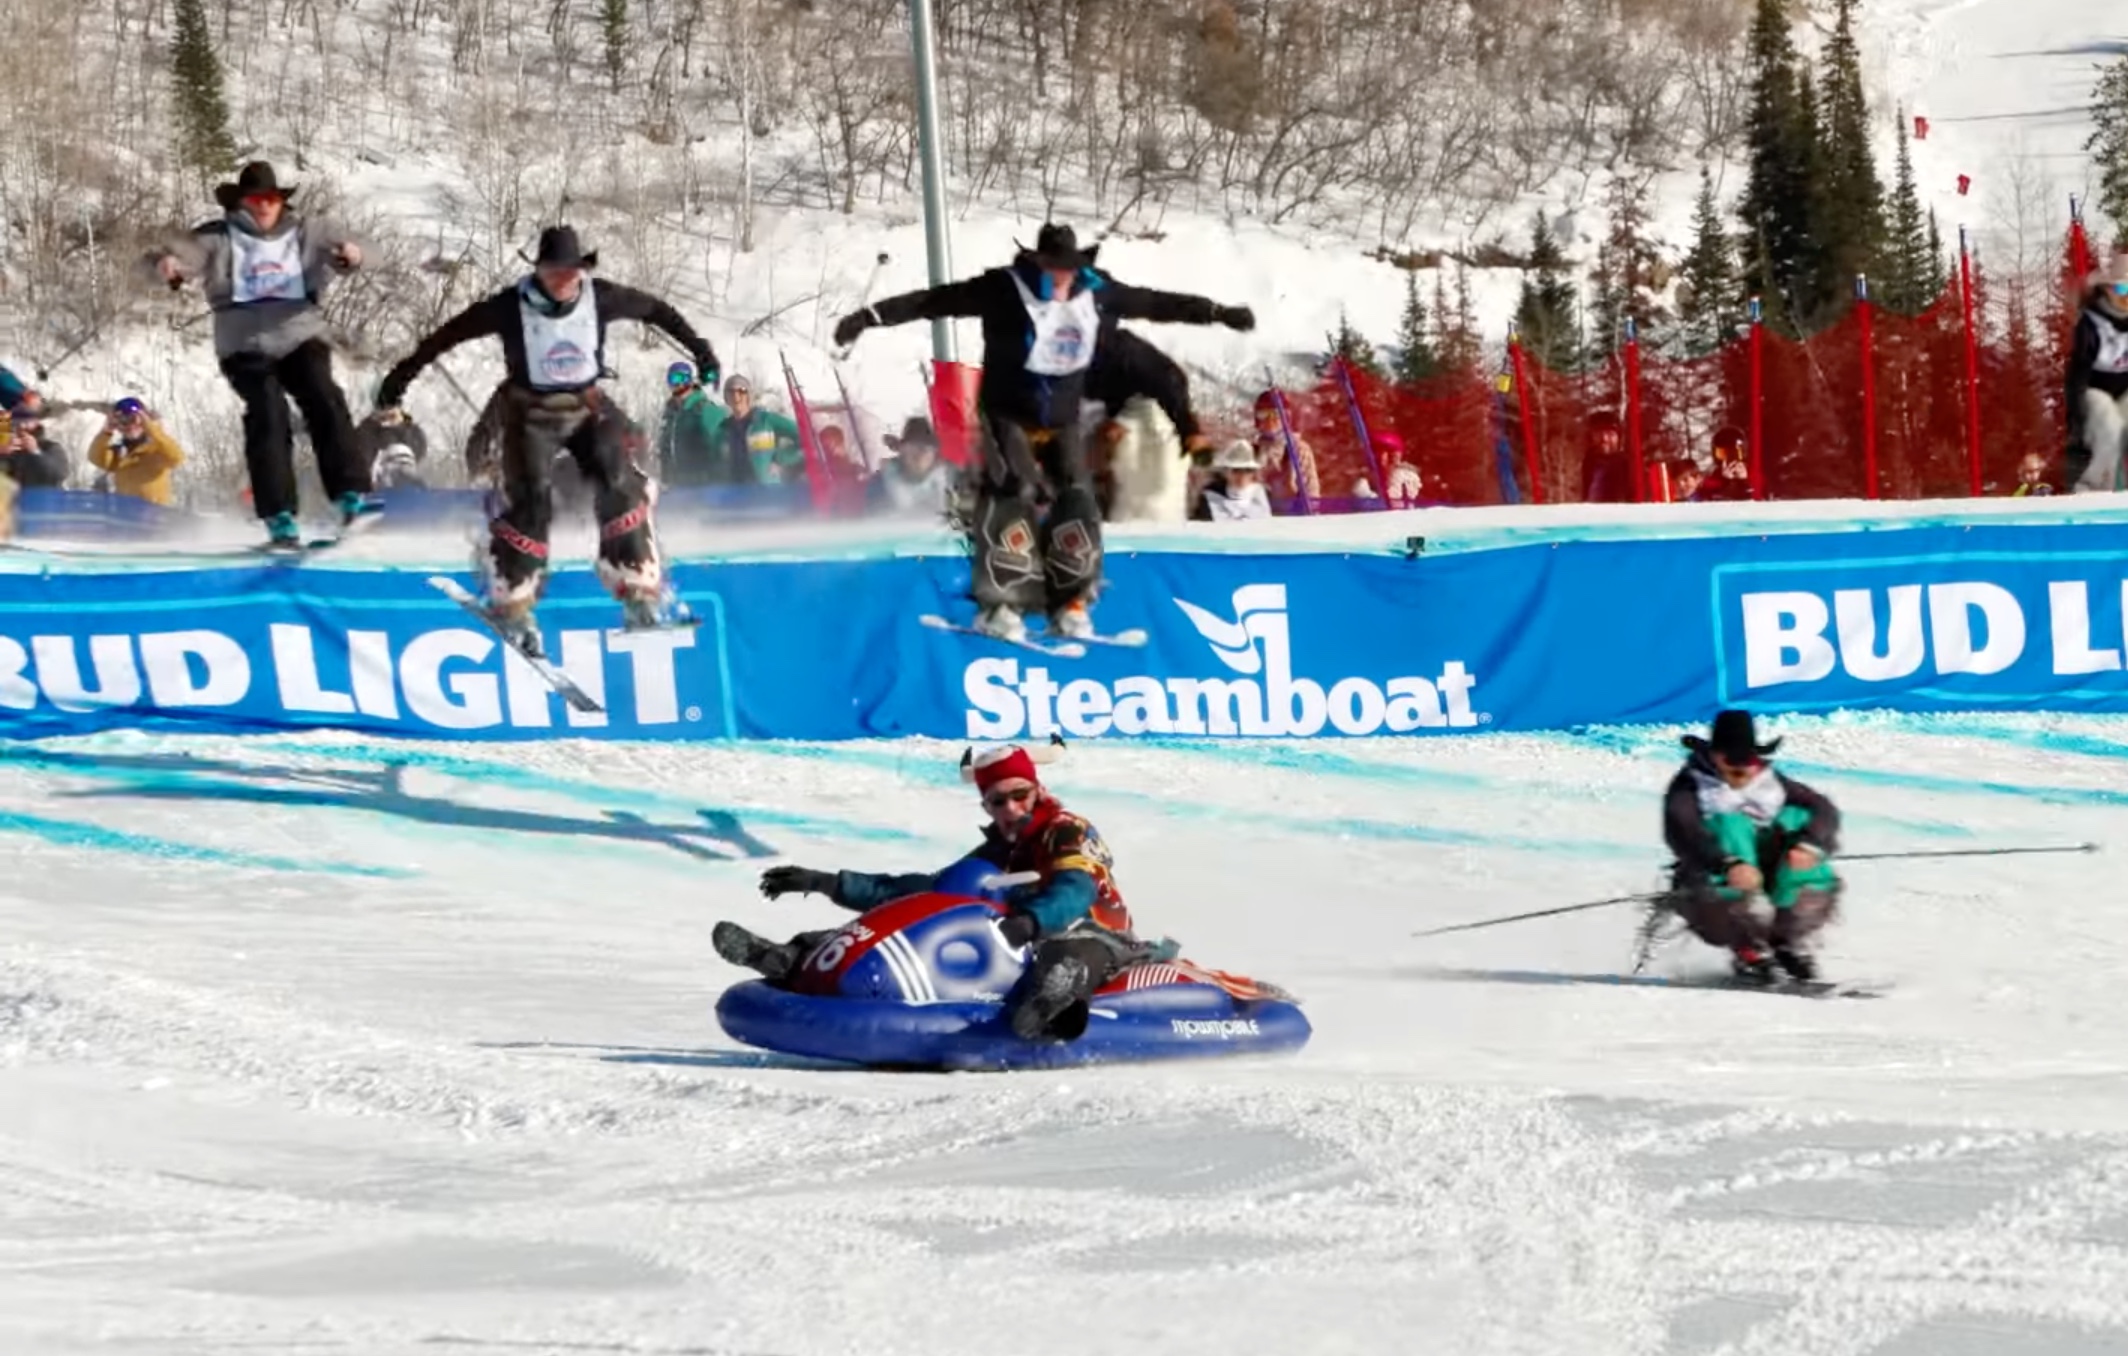 VIDEO: 100+ Cowboys Attempt Ski Racing @ Steamboat